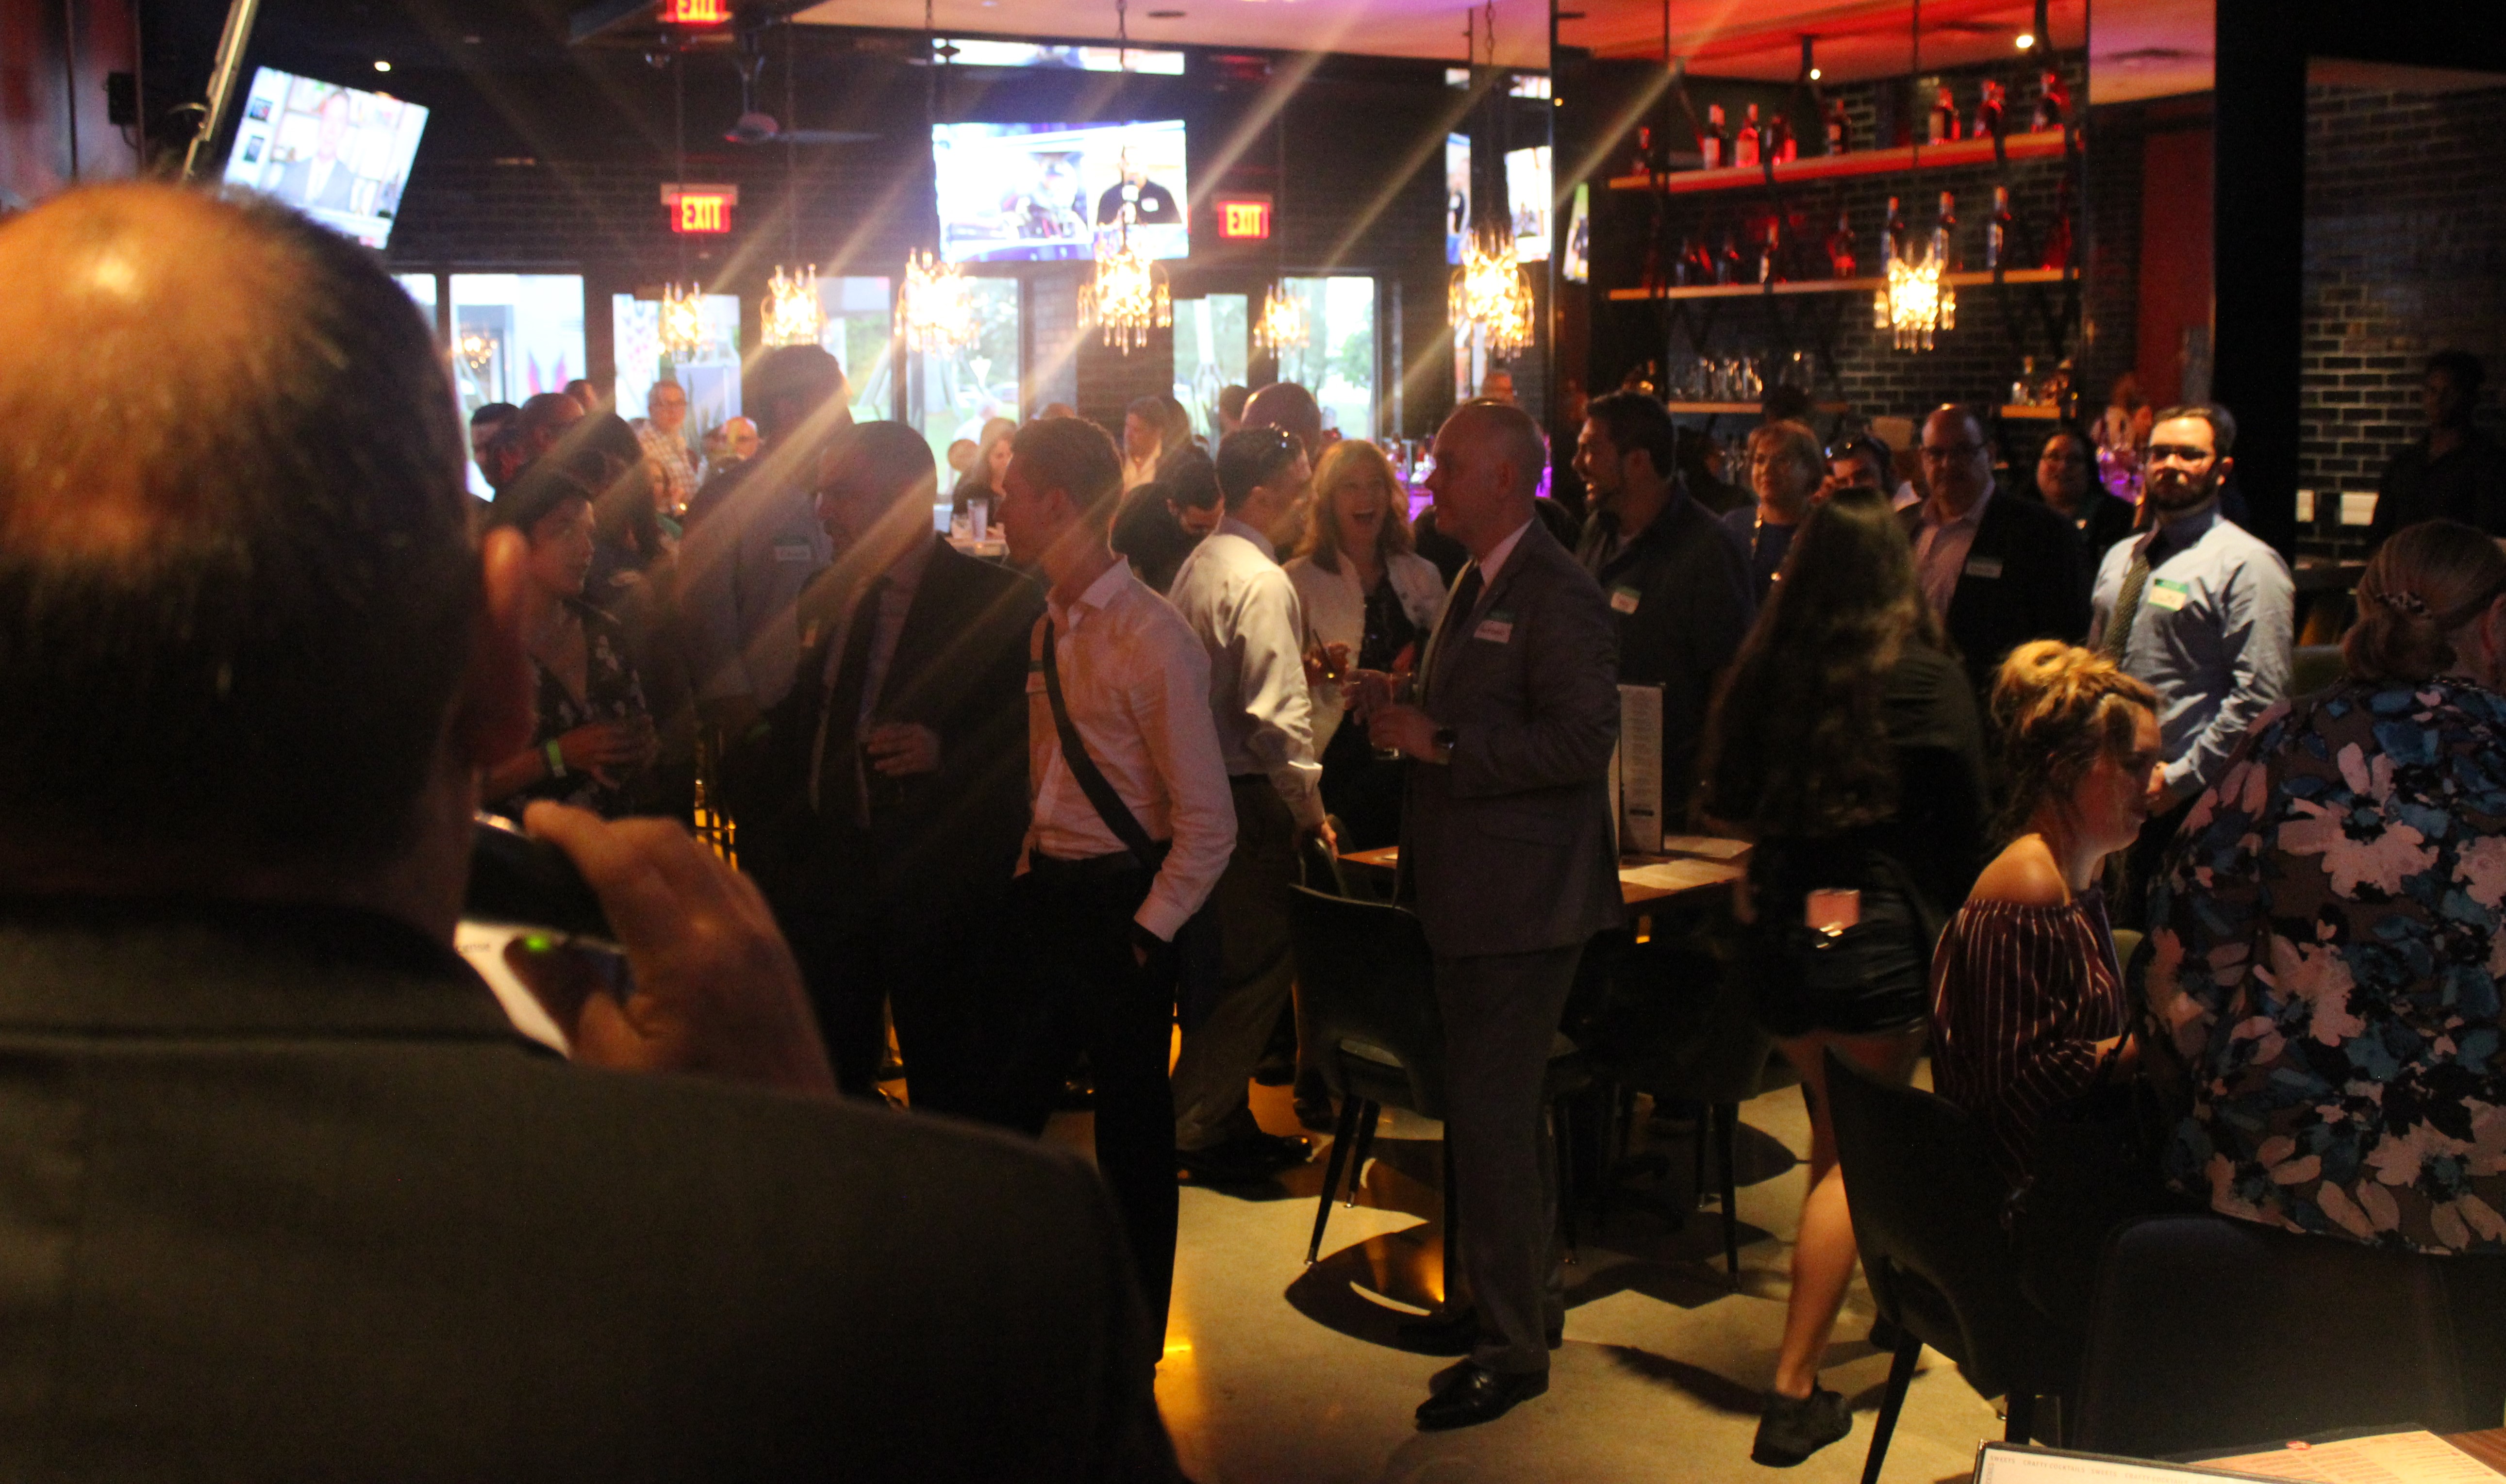 King's Bowl Business Networking event hosted by the Doral Chamber of Commerce.